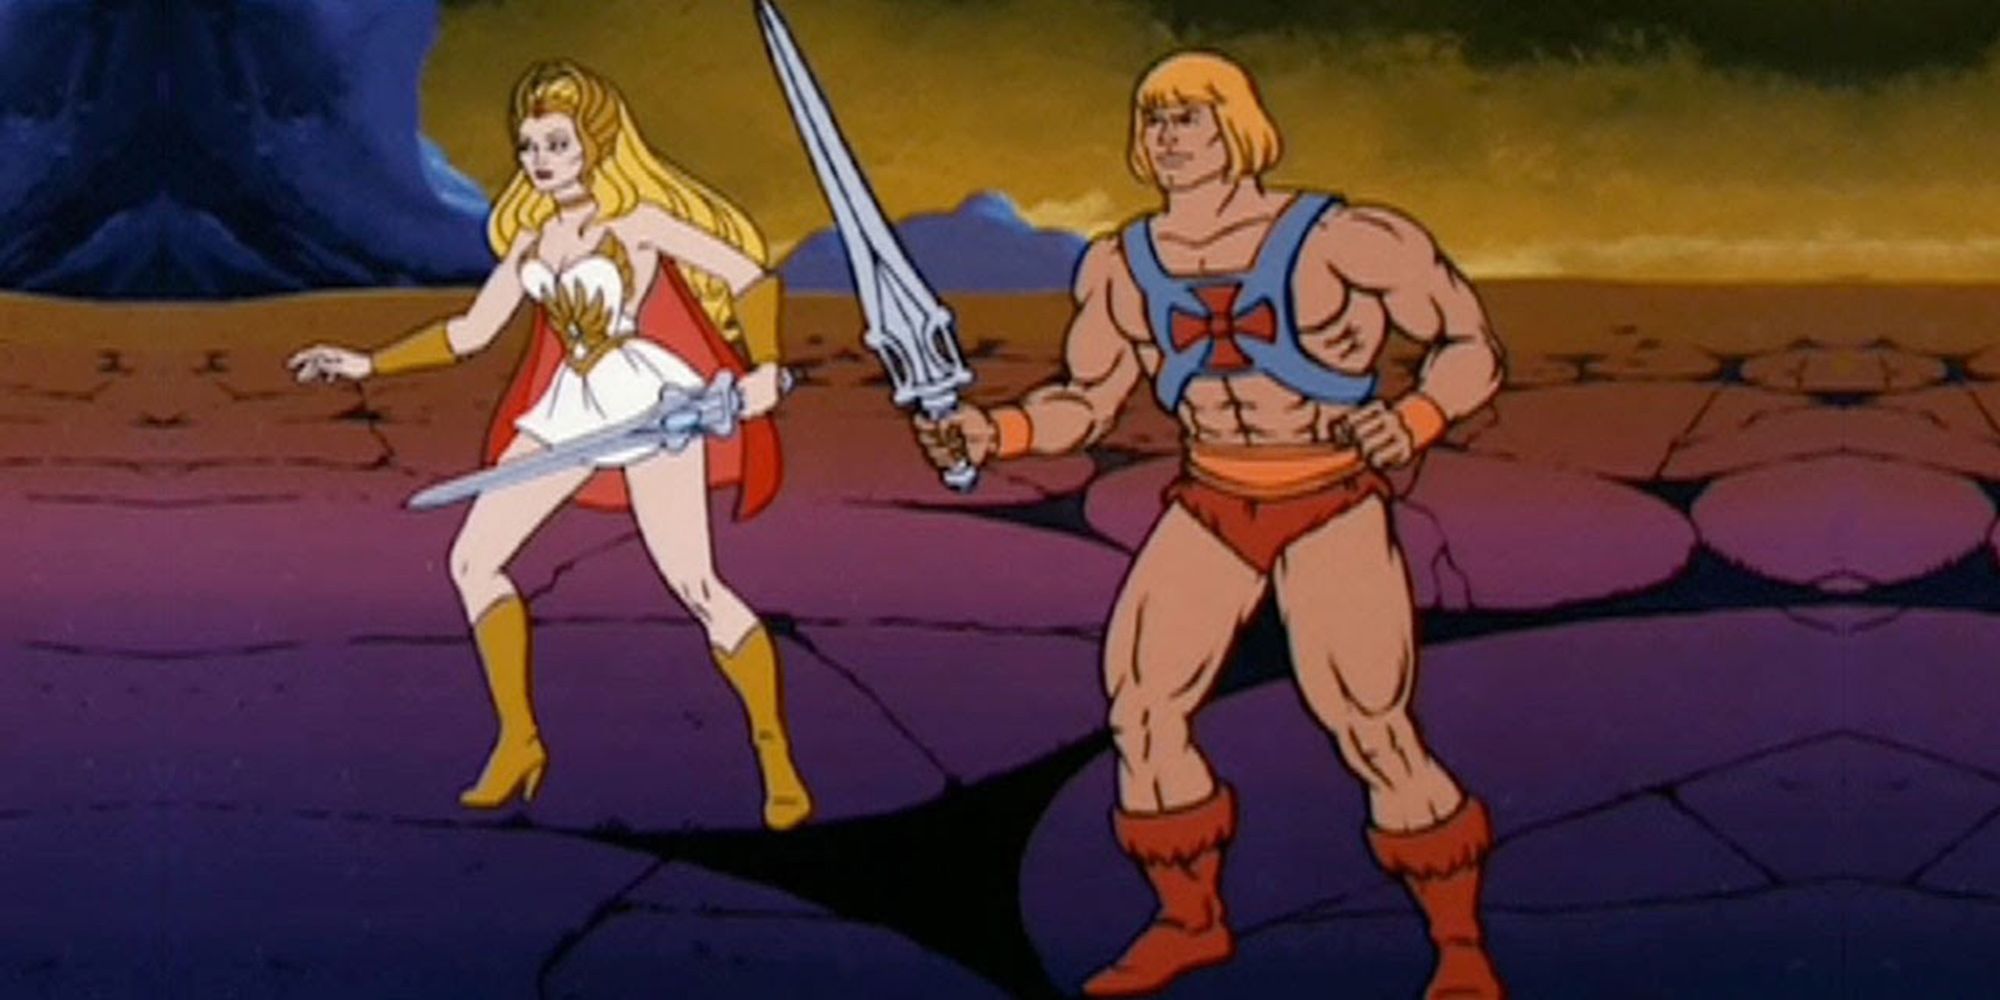 HE-MAN AND SHE-RA IN THE SECRET OF THE SWORDS